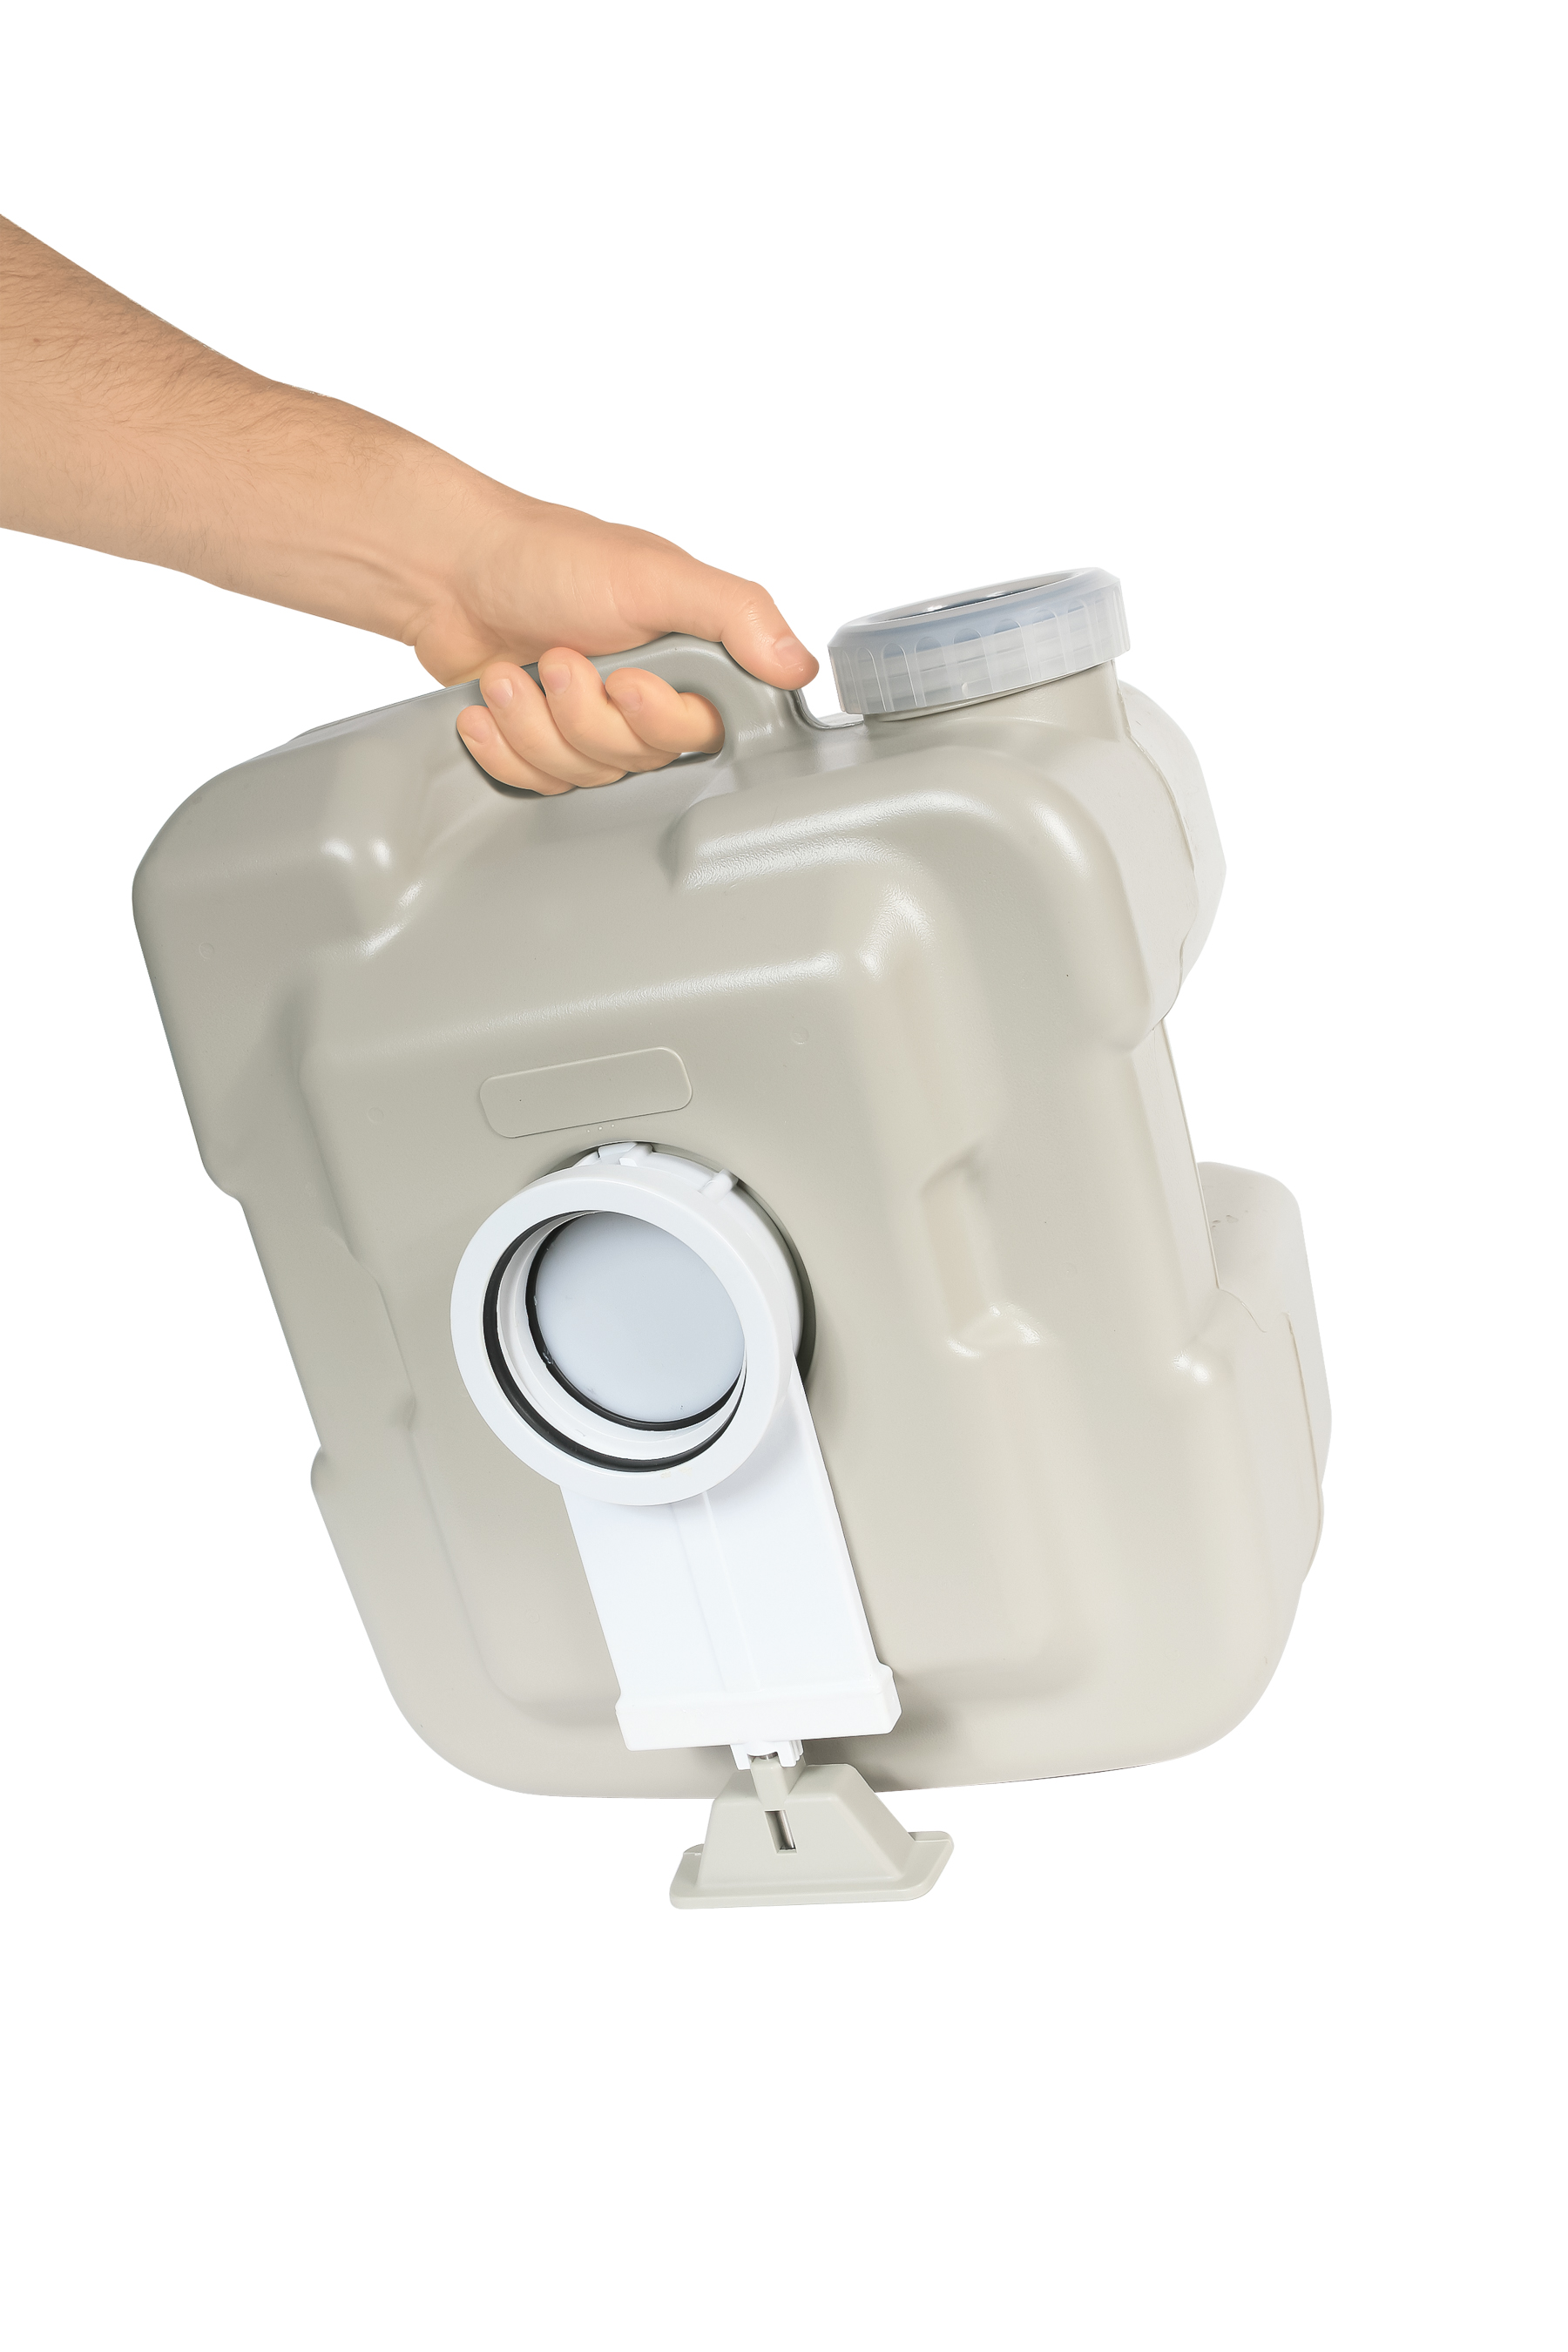 Camco 41541 Portable Toilet, 5.3 Gallon for RV, Camping, Boating and Outdoor - image 5 of 5